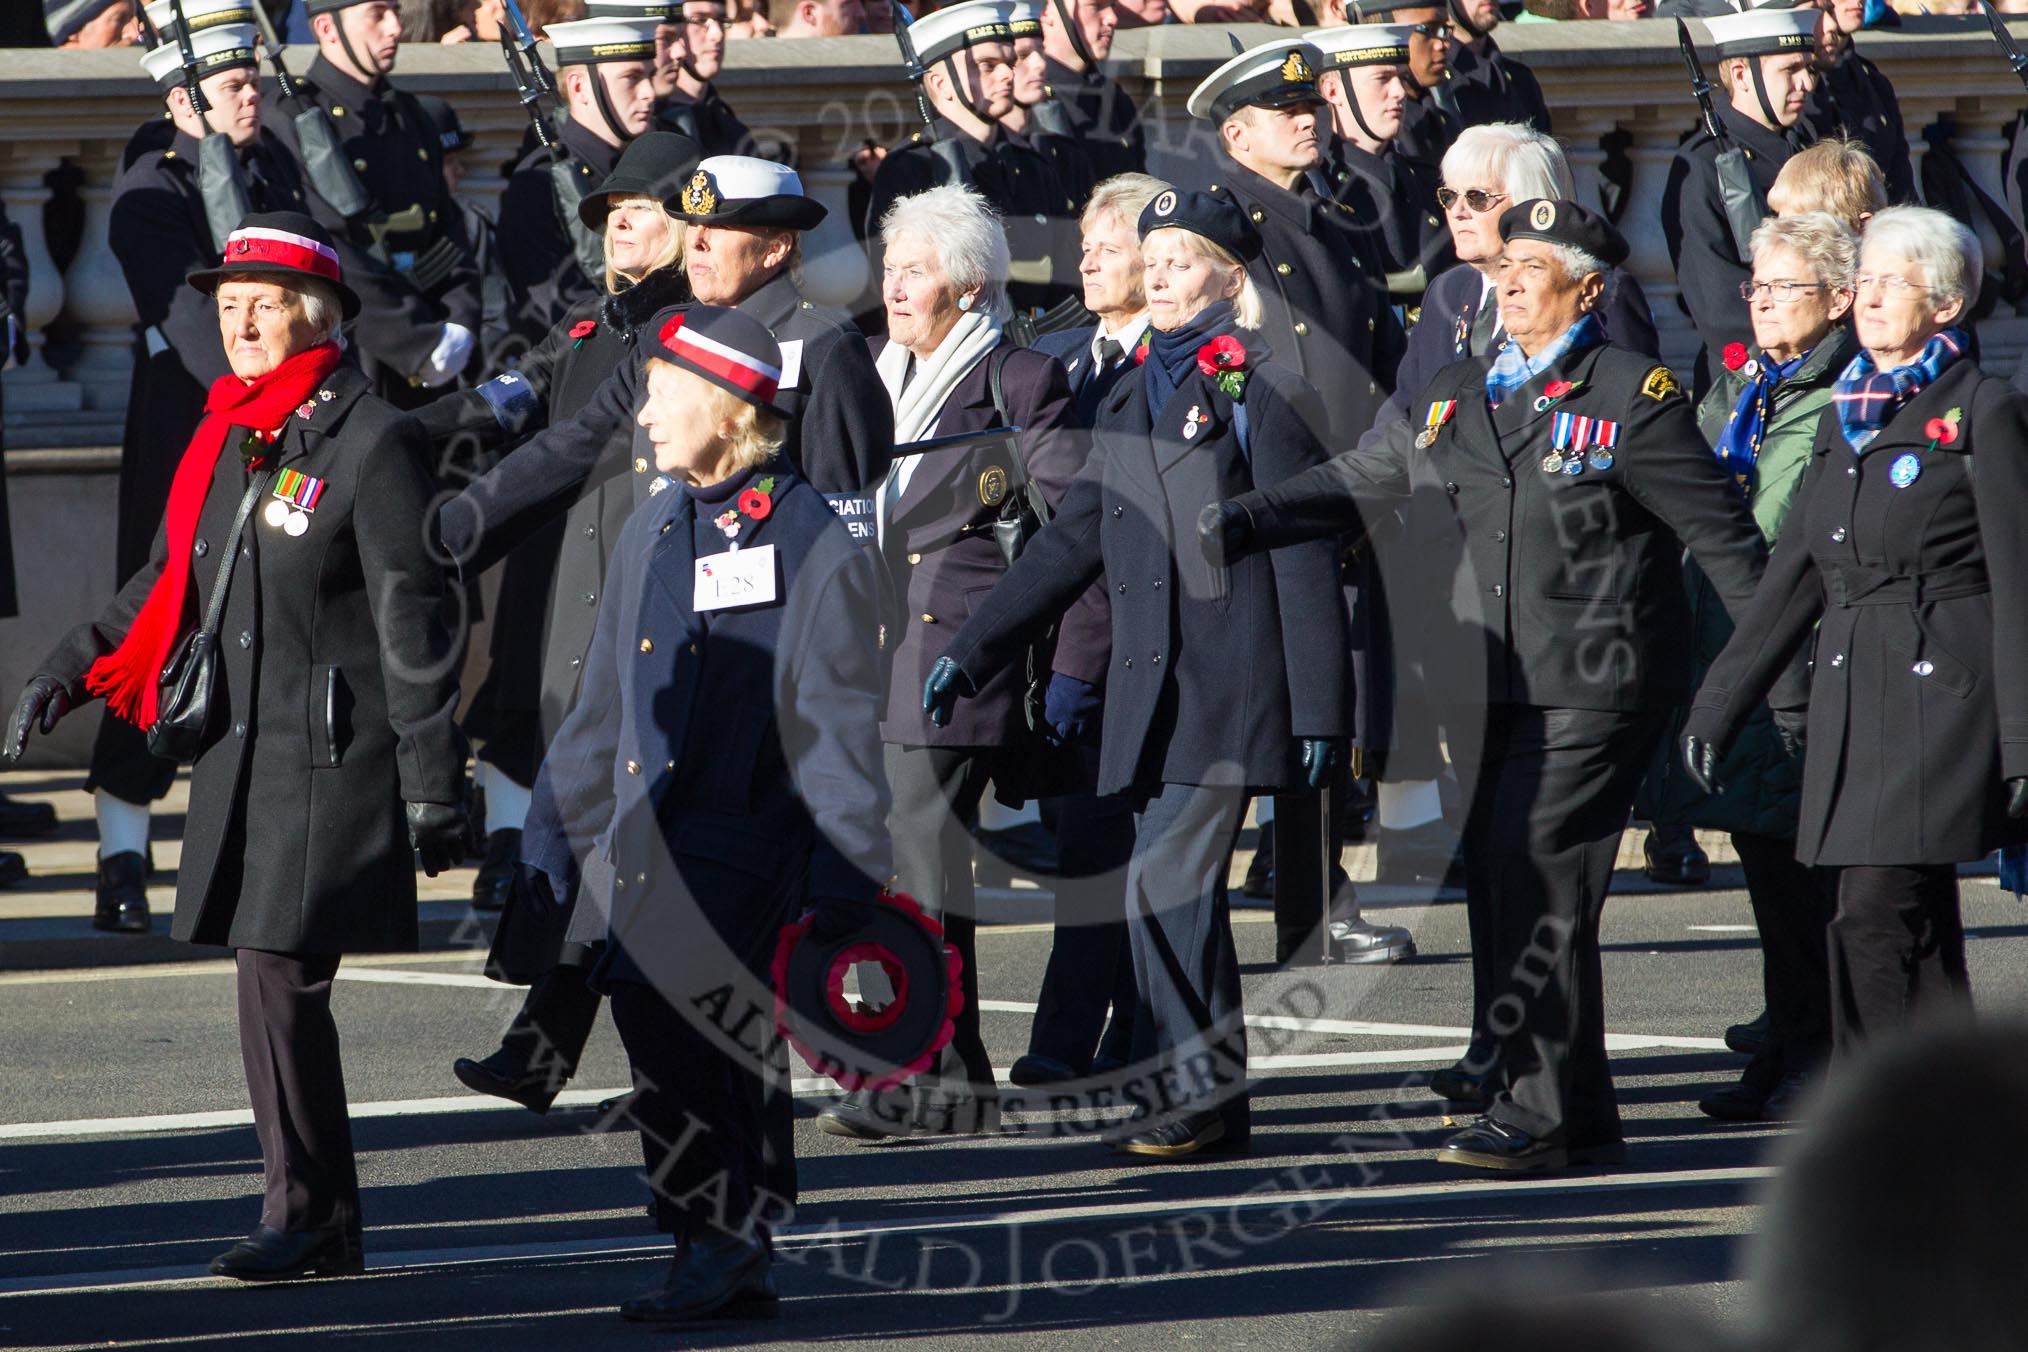 Remembrance Sunday 2012 Cenotaph March Past: Group E28 - VAD RN Association..
Whitehall, Cenotaph,
London SW1,

United Kingdom,
on 11 November 2012 at 11:41, image #200